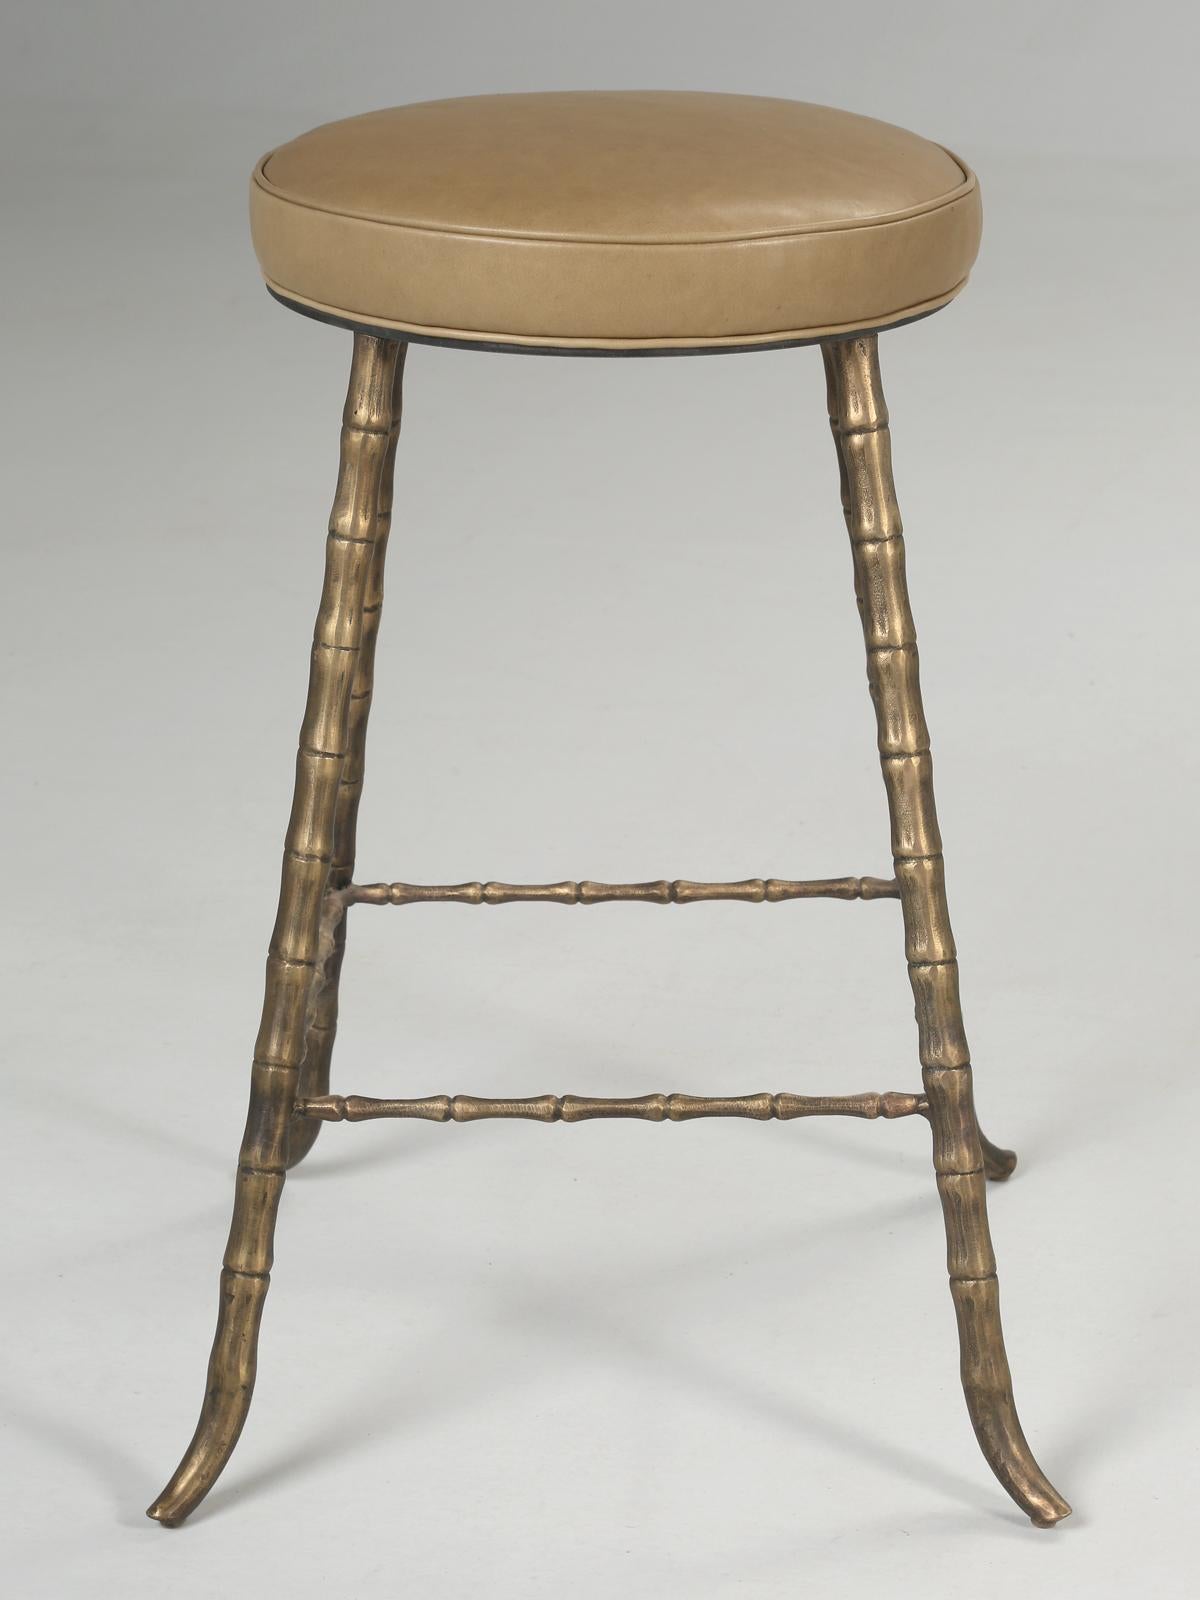 Elegant solid bronze faux bamboo counter stool inspired by Maison Jansen. Our mid-century modern kitchen counter stools are not only very comfortable, but are made here in our Chicago workshop. The stool shown in this 1stdibs listing is in stock and